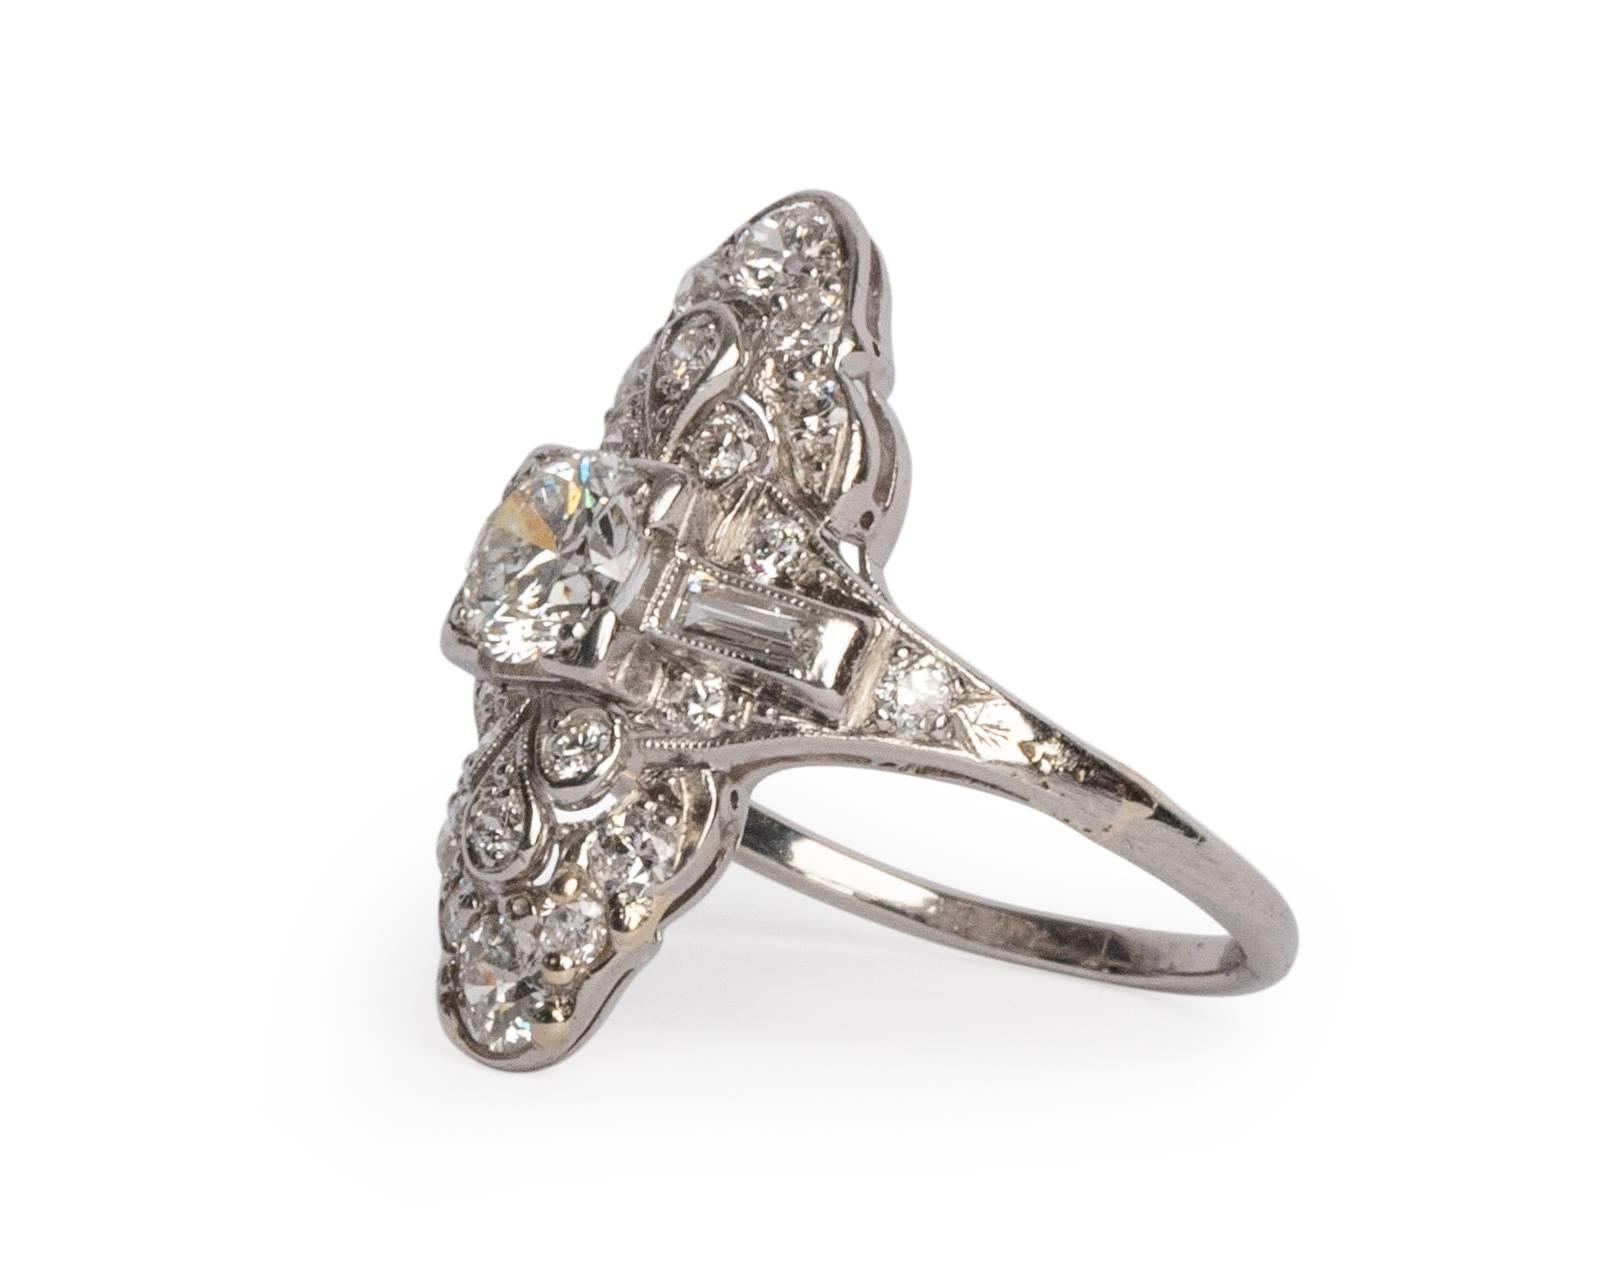 Here we have an 1930's  Art Deco Platinum aprox 1/2 cttw Old European Cut Diamond Shield Ring! The intricate filigree designs really tie together the look of this art deco stunner!  This piece is true to the Art Deco. The shape is truly unique and